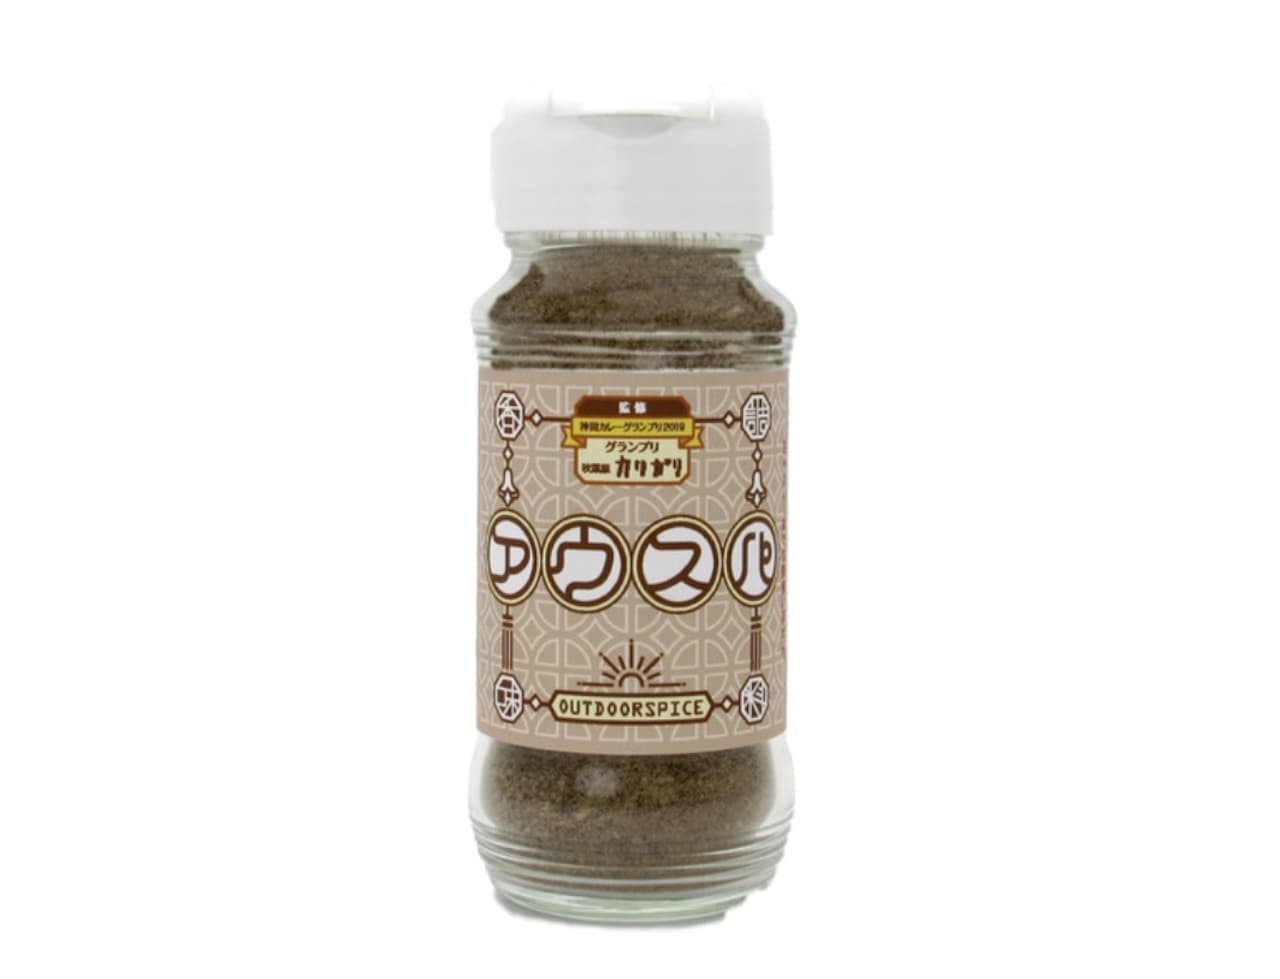 From the authentic outdoor spice "Auspa" MELAME